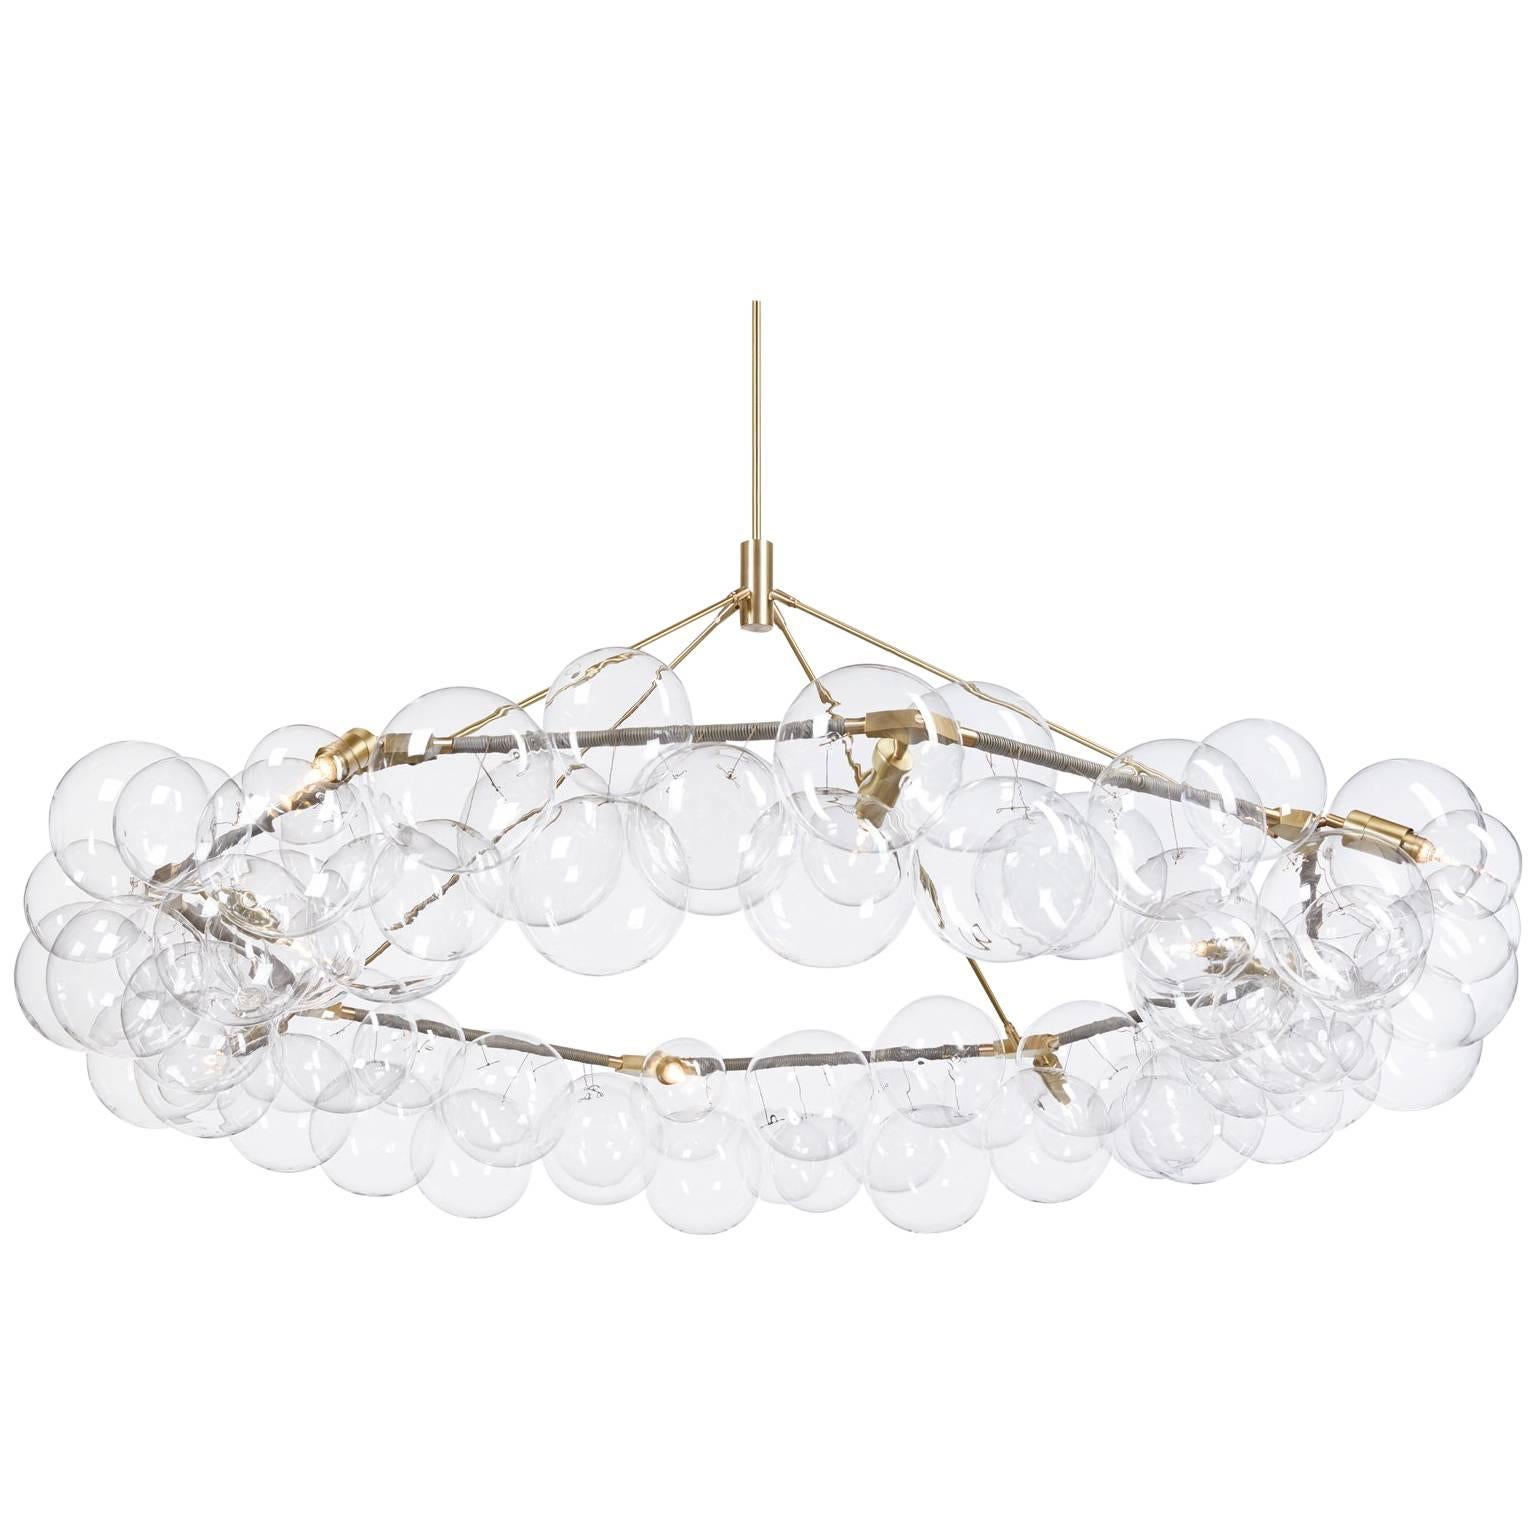 Wreath Bubble Chandelier in Grey Leather and Satin Brass by Pelle